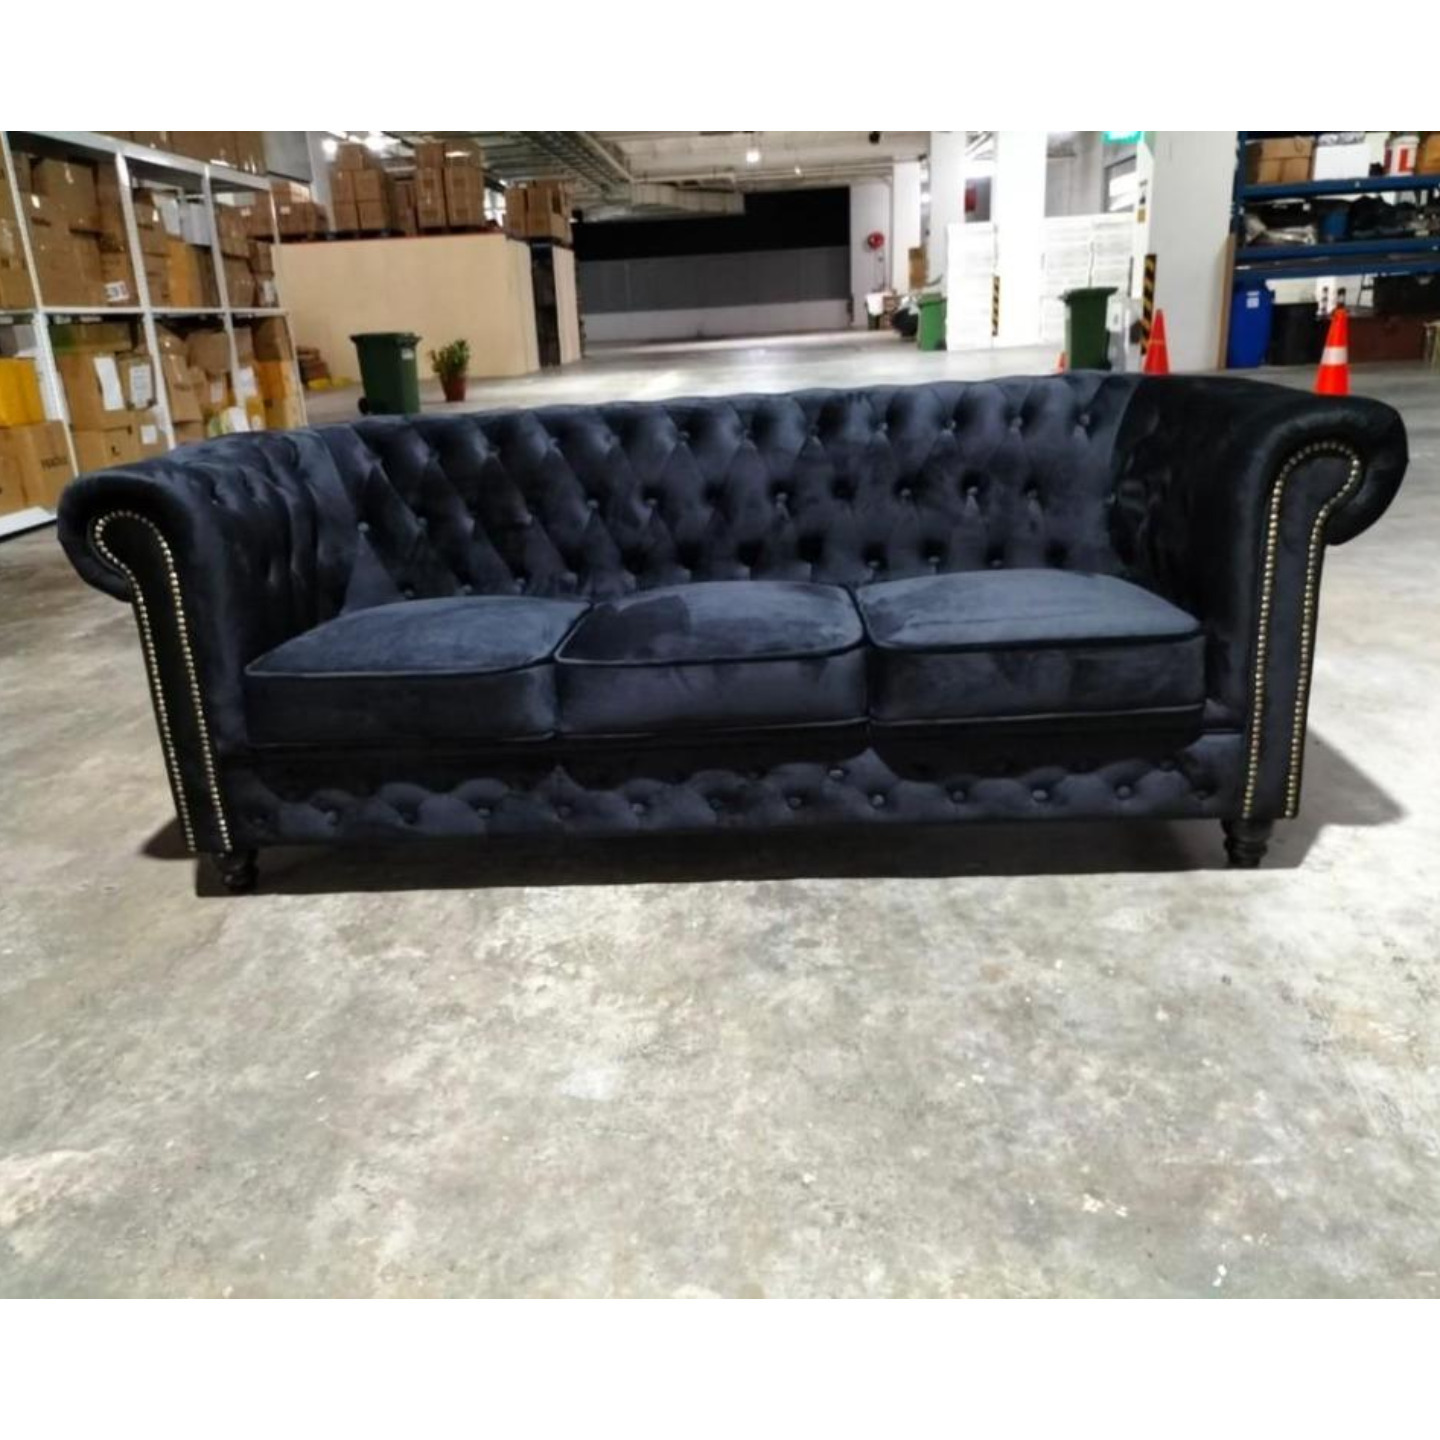 PRE ORDER SALVADORE X 3 Seater Chesterfield Sofa in Velvet Black - estimated delivery by July 2023